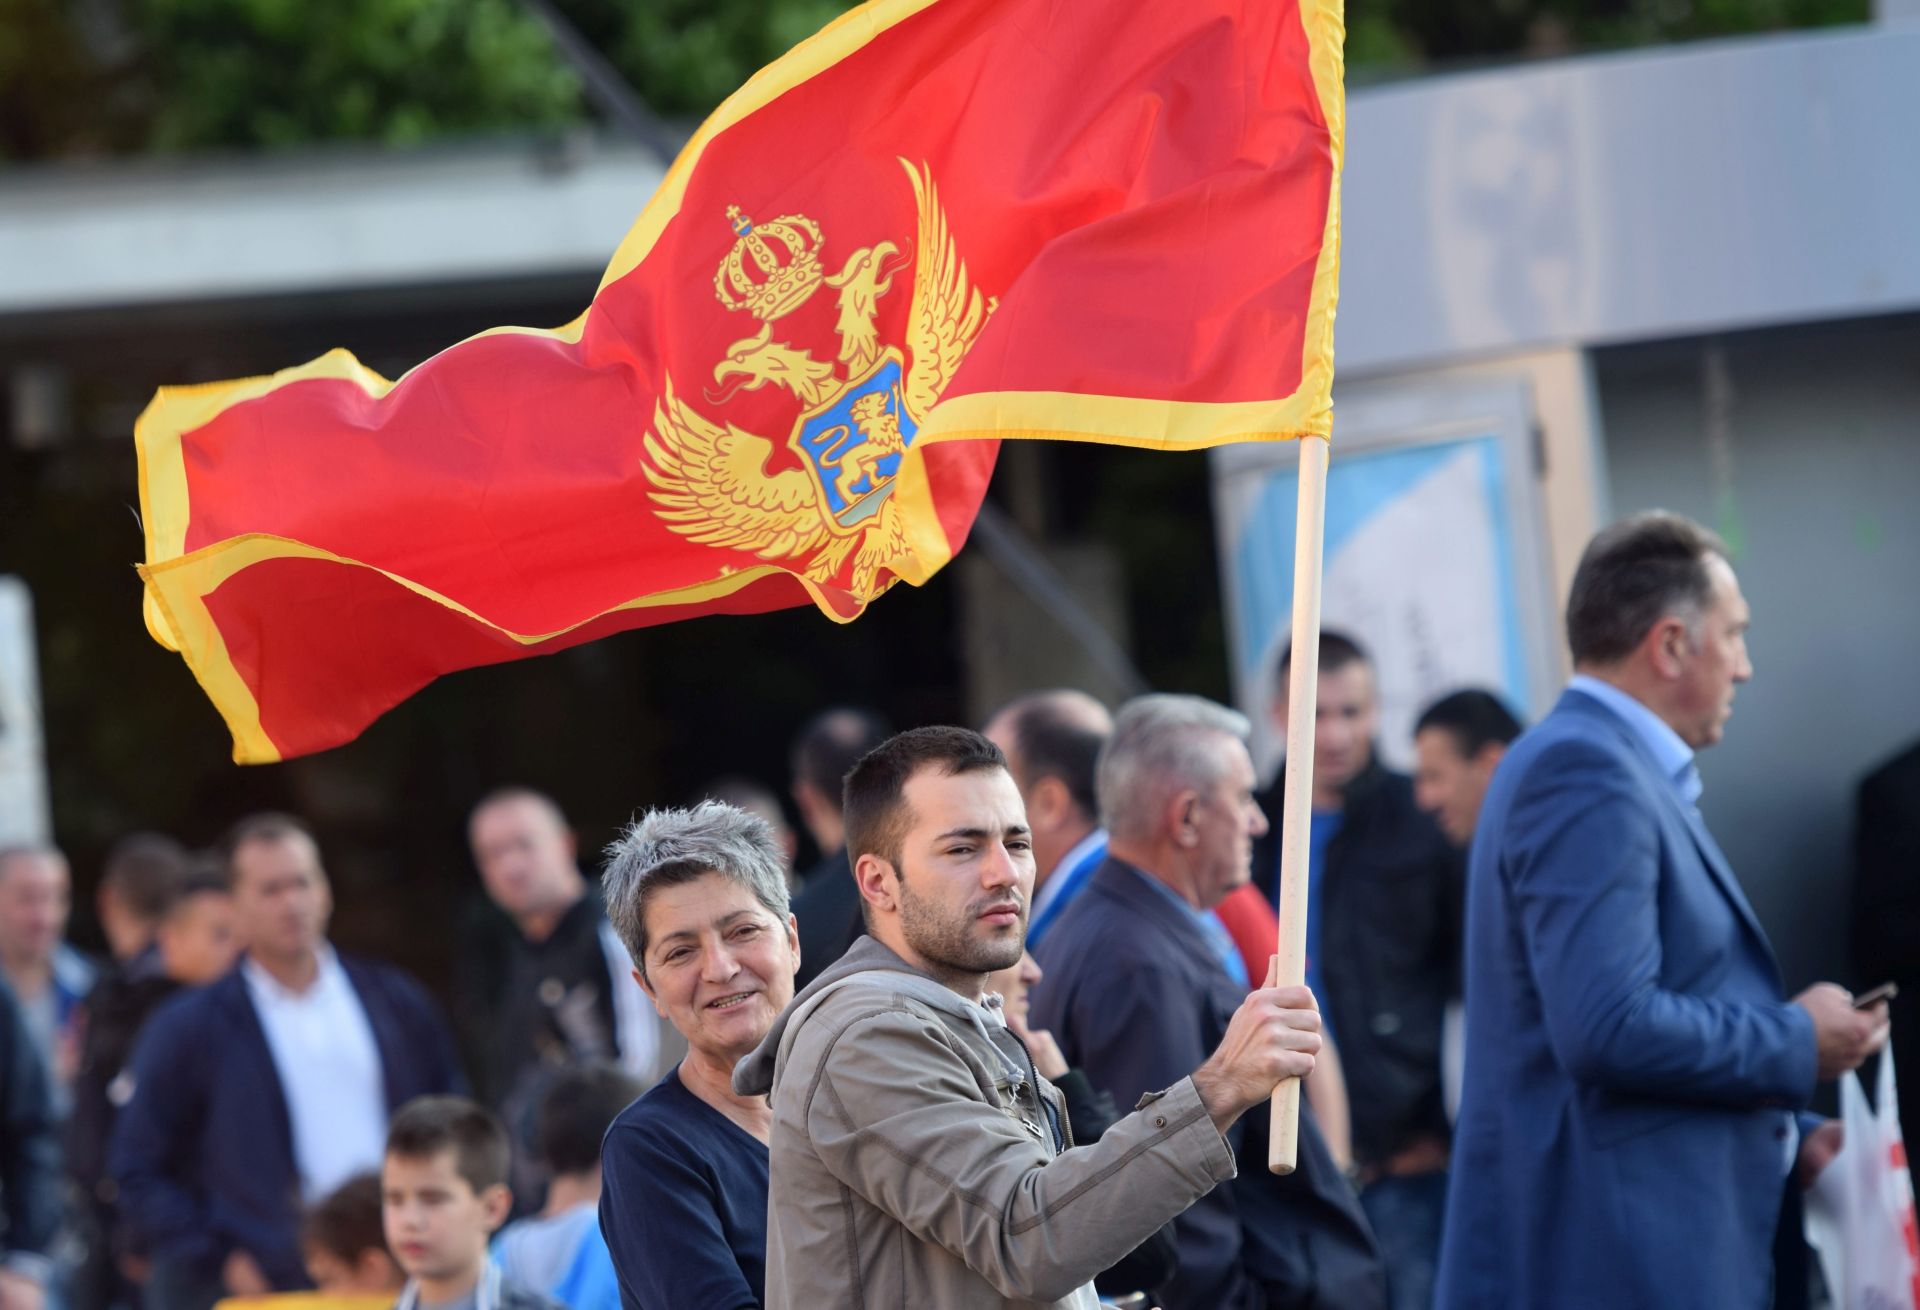 epa05321914 A man holds the Montenegrin flag at the Independence Square during the celebrations for the country's 10th anniversary of its Independence Day in Podgorica, Montenegro, 21 May 2016.  EPA/BORIS PEJOVIC